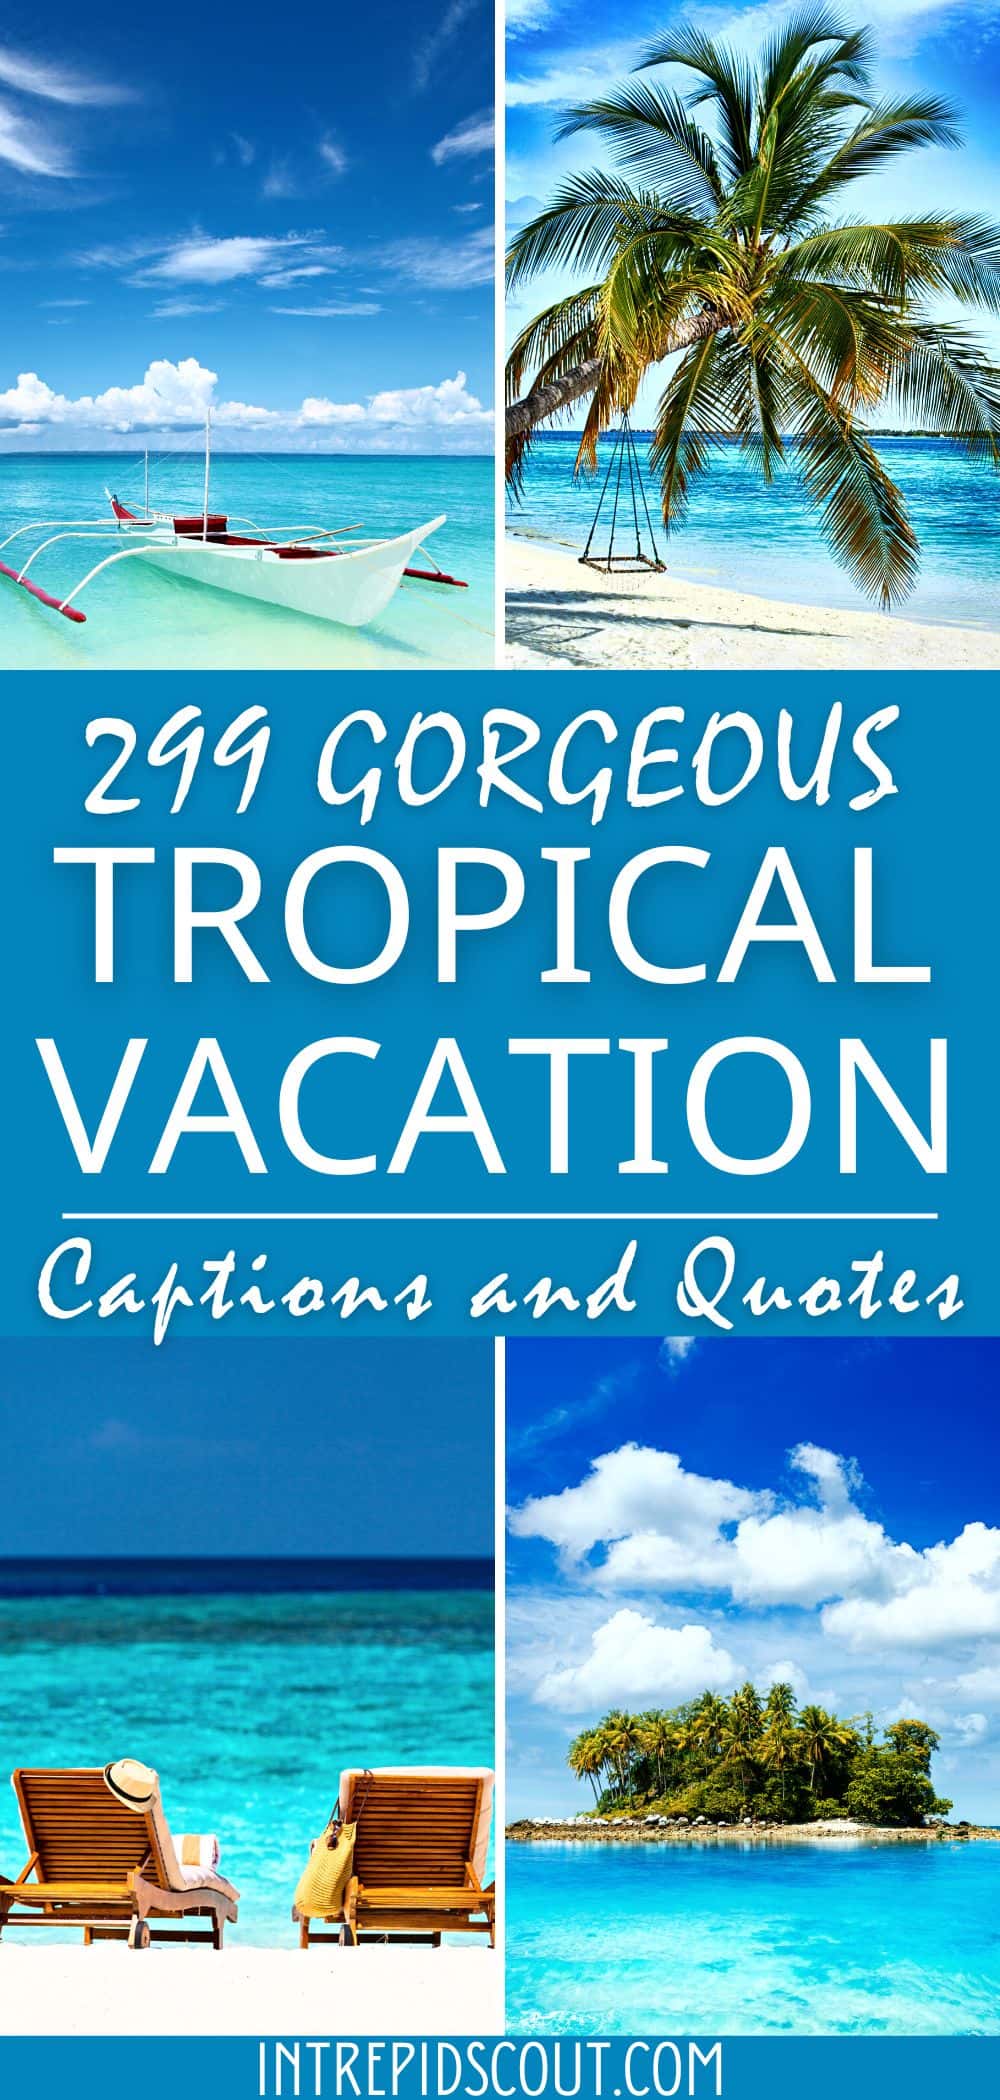 65 Beach Quotes & Captions That Feel Like A Vacation